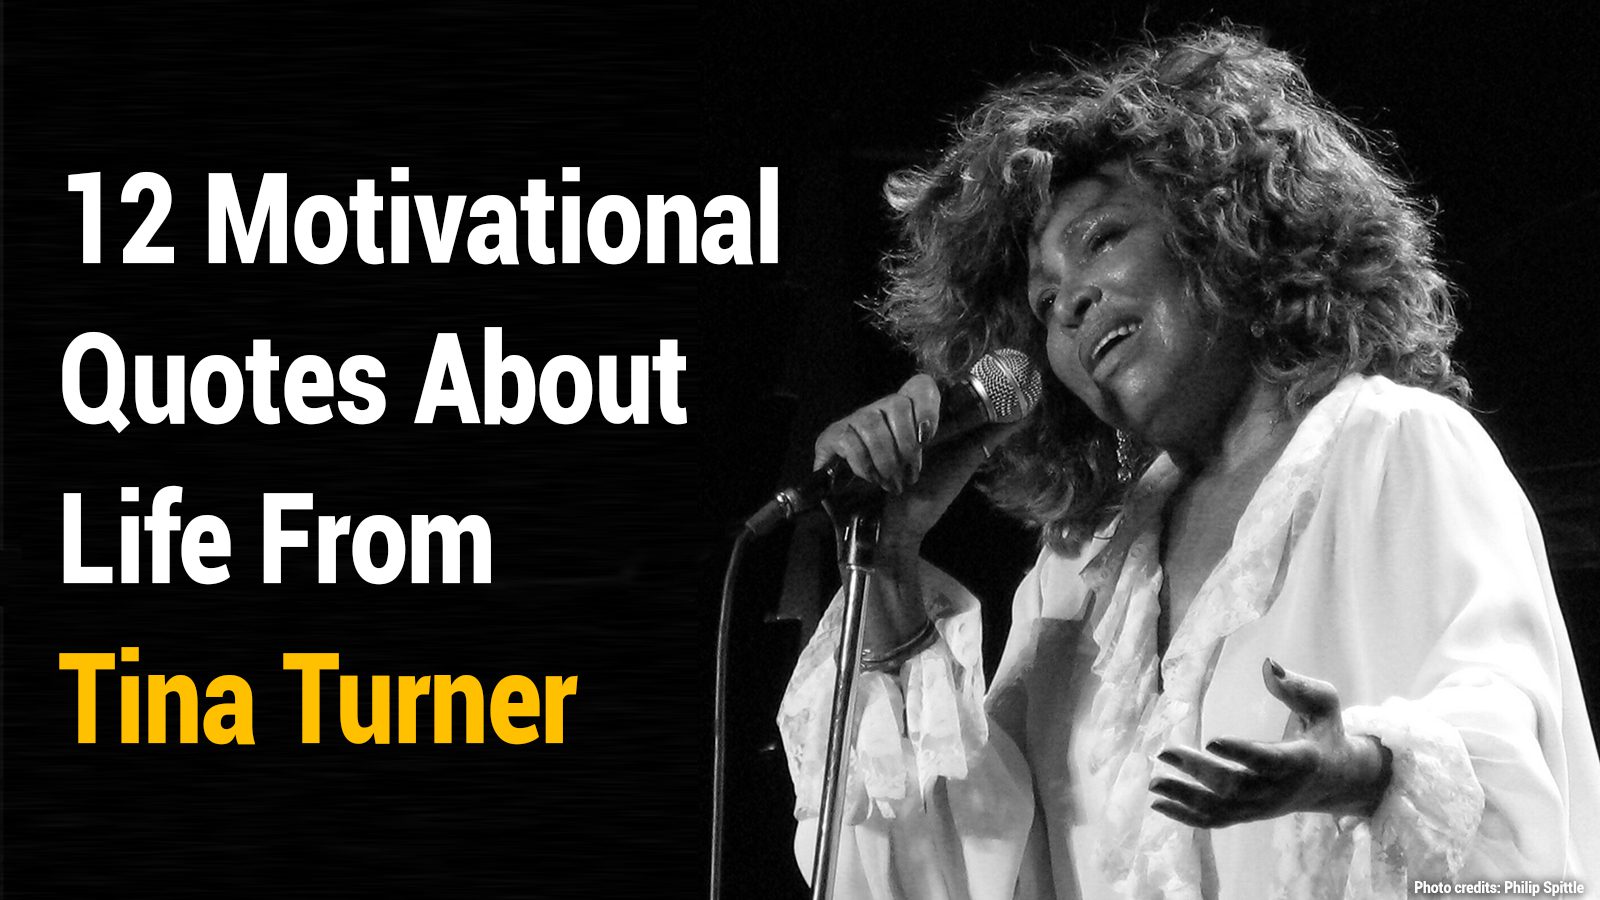 12 Motivational Quotes About Life From Tina Turner